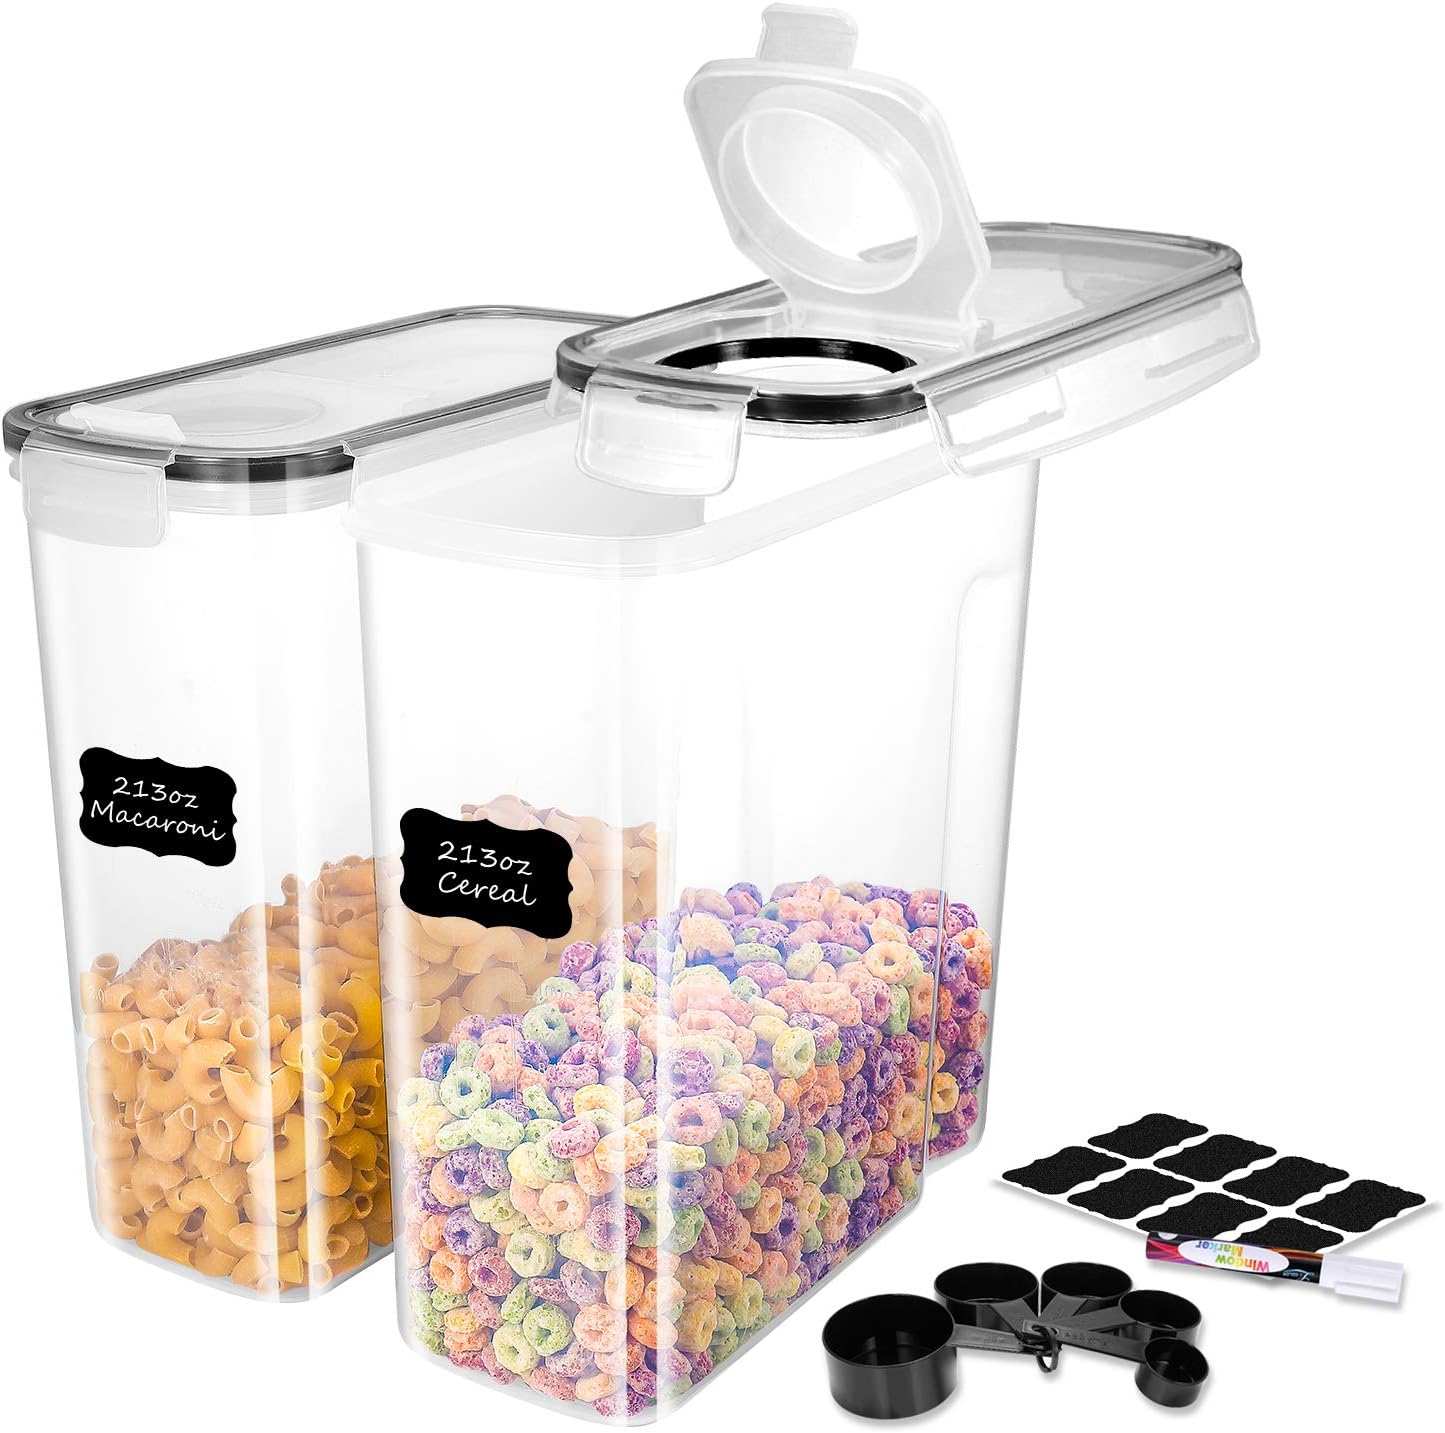 ME.FAN Cereal Storage Containers [2 Set] 6.3L(213oz) Airtight Food Storage Containers - Large Kitchen Storage Keeper with 24 Chalkboard Labels & Pen - Easy Pouring Lid (Black)